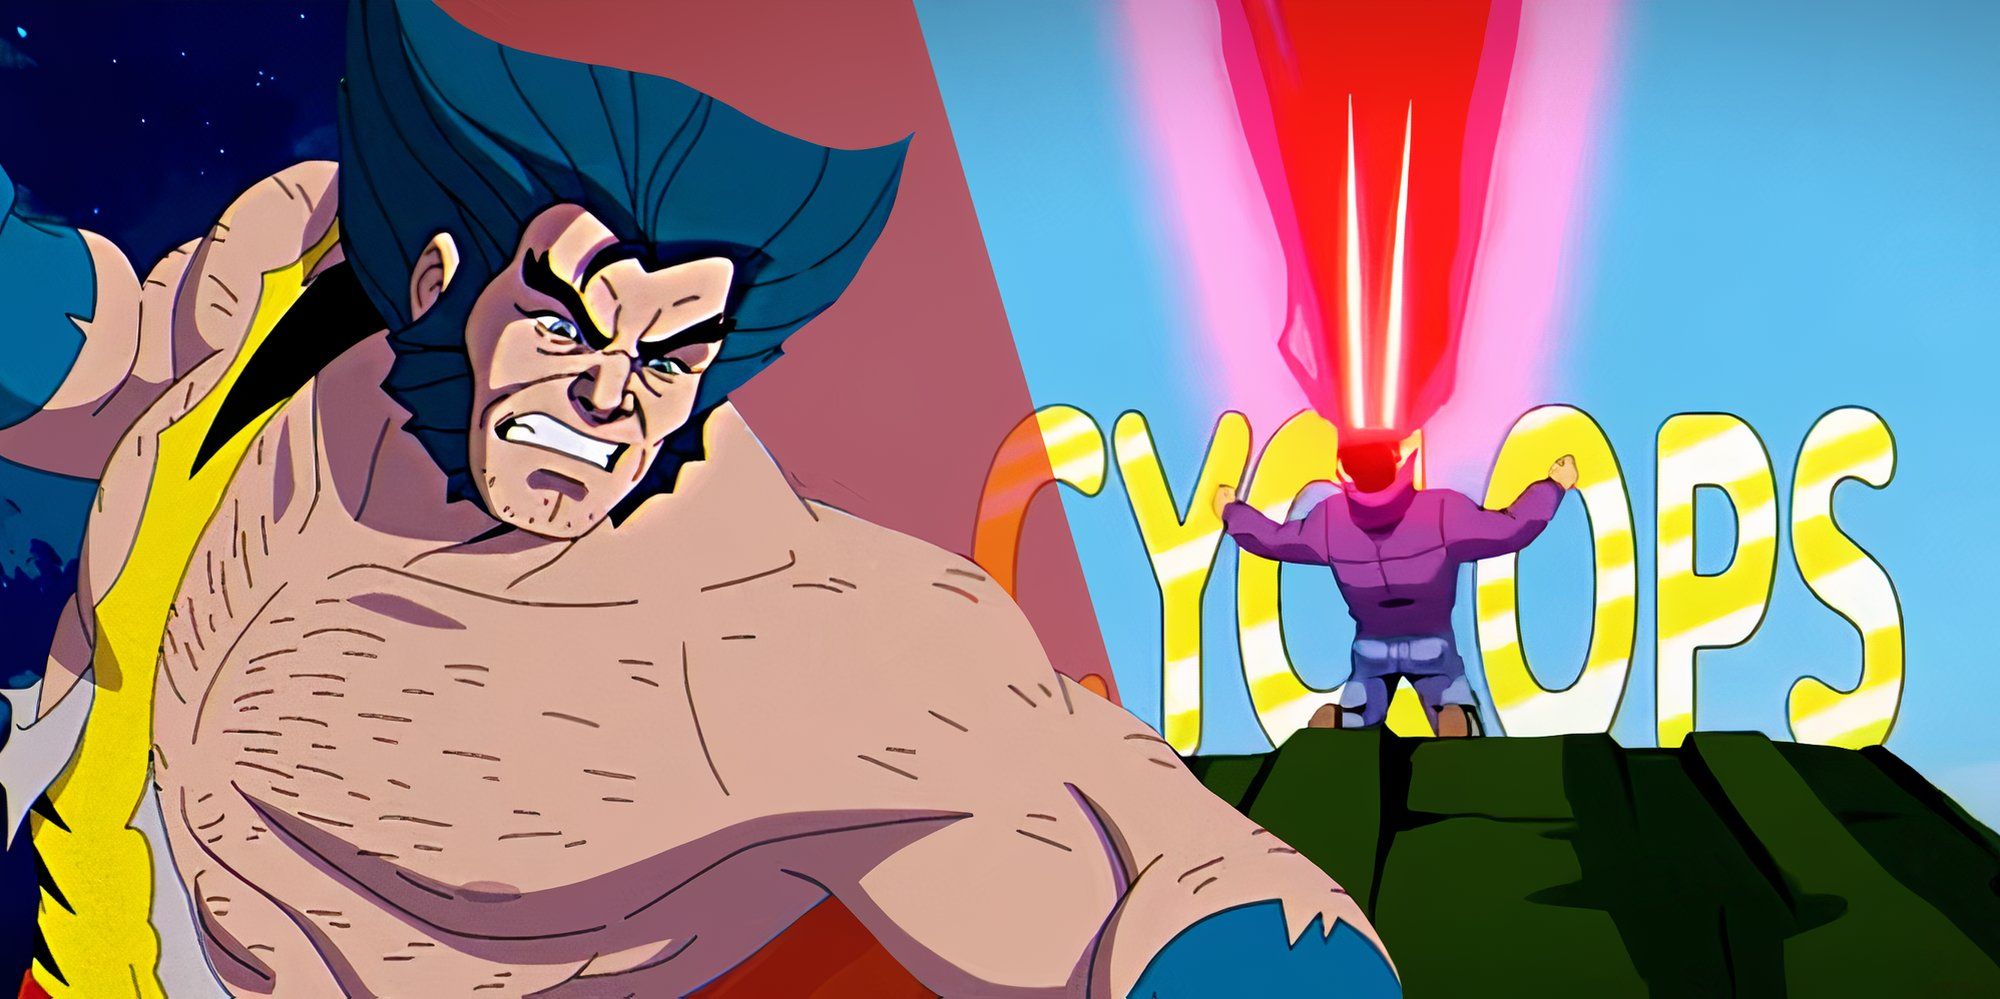 Wolverine snarling in X-Men '97 (2024) next to Cyclops' scene from X-Men: The Animated Series' intro